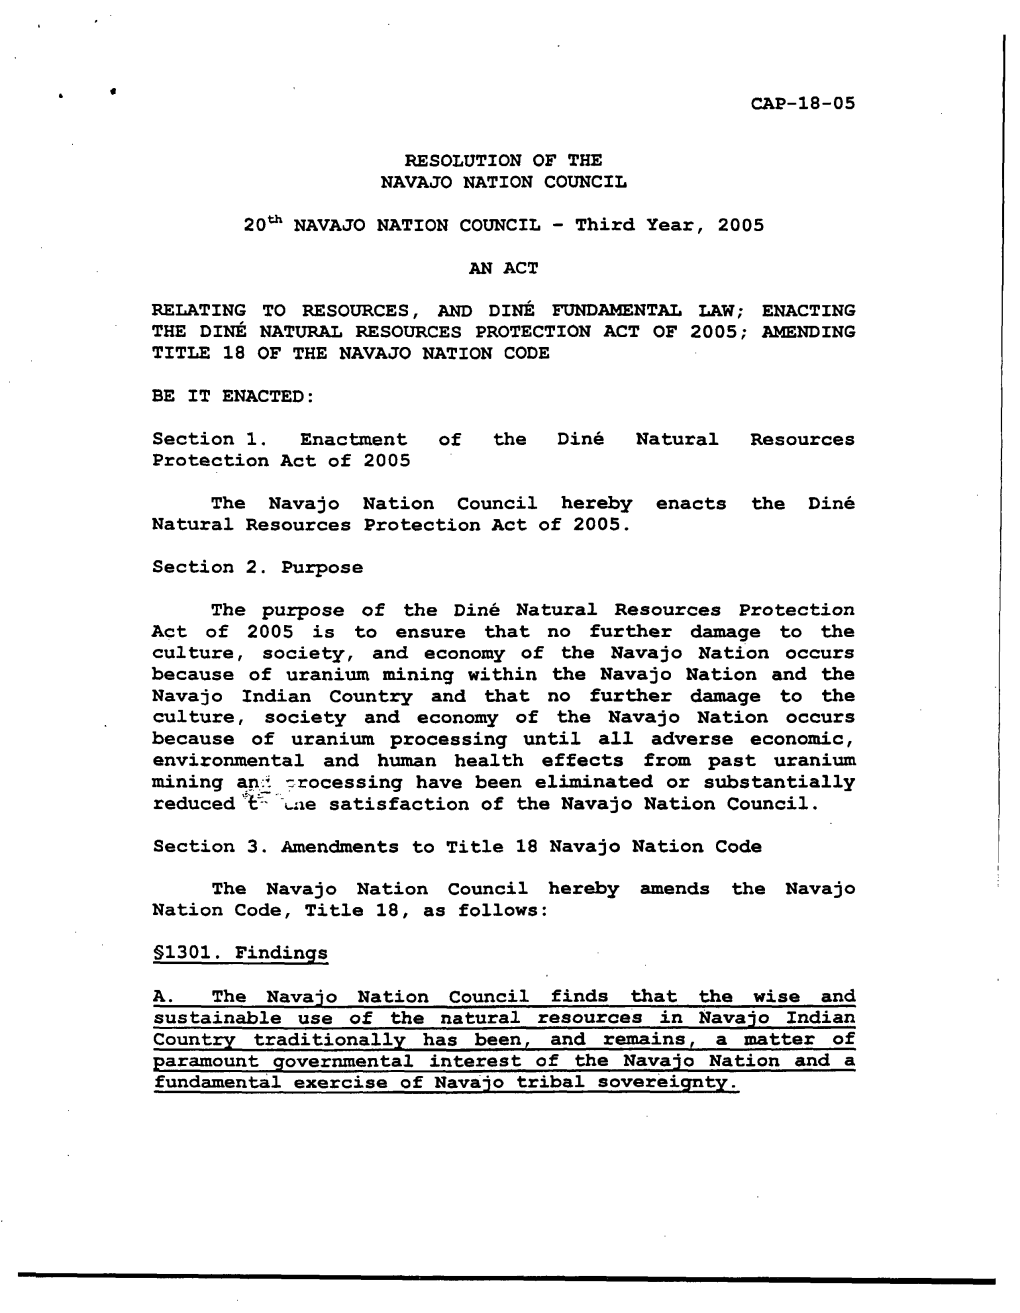 04/21/05 Resolution of the Navajo Nation Council CAP-18-05, Banning Uranium Mining and Processing Within Navajo Indian Country